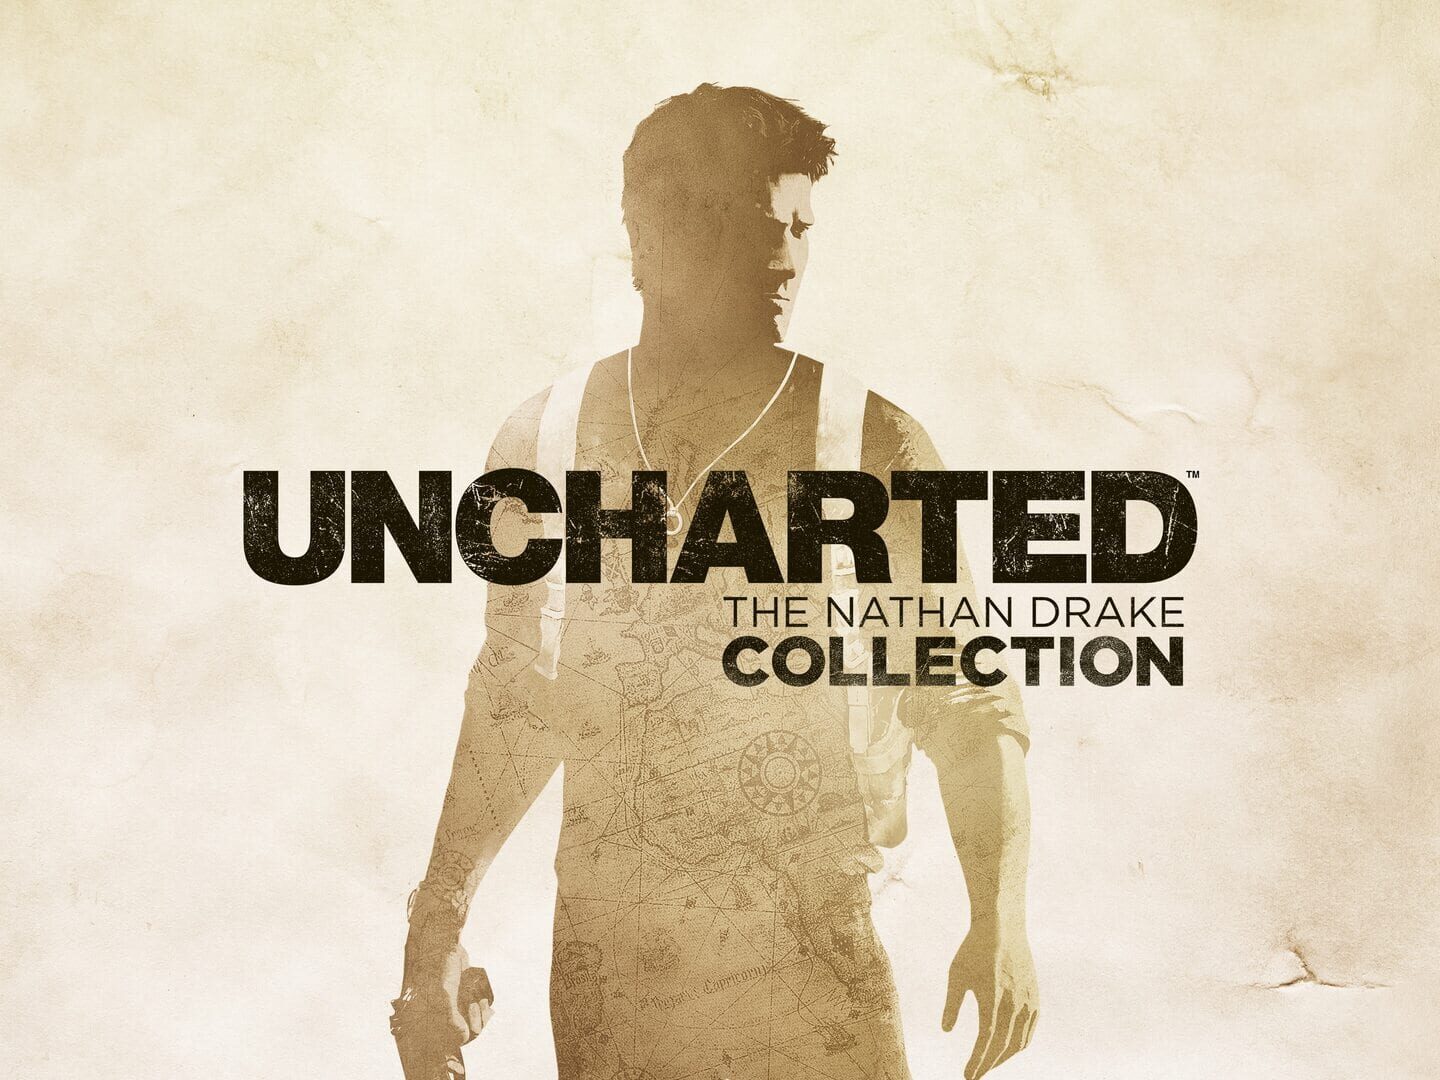 Artwork for Uncharted: The Nathan Drake Collection